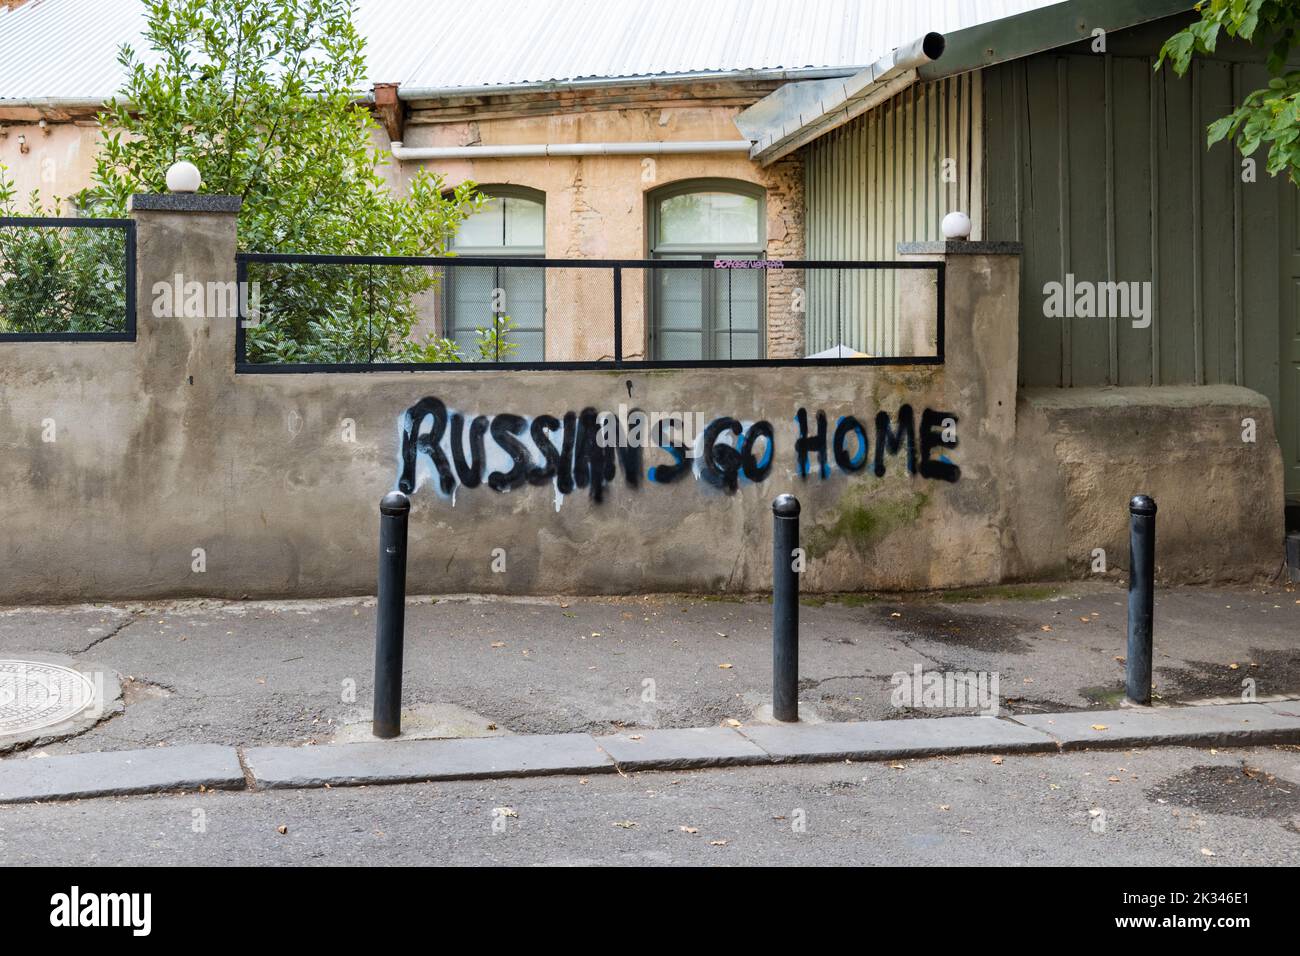 Tbilisi, Georgia - September 2022: Anti Russian slogan or sign on the street in downtown Tbilisi, Georgia. Anti Russian sentiment graffiti in Georgia Stock Photo